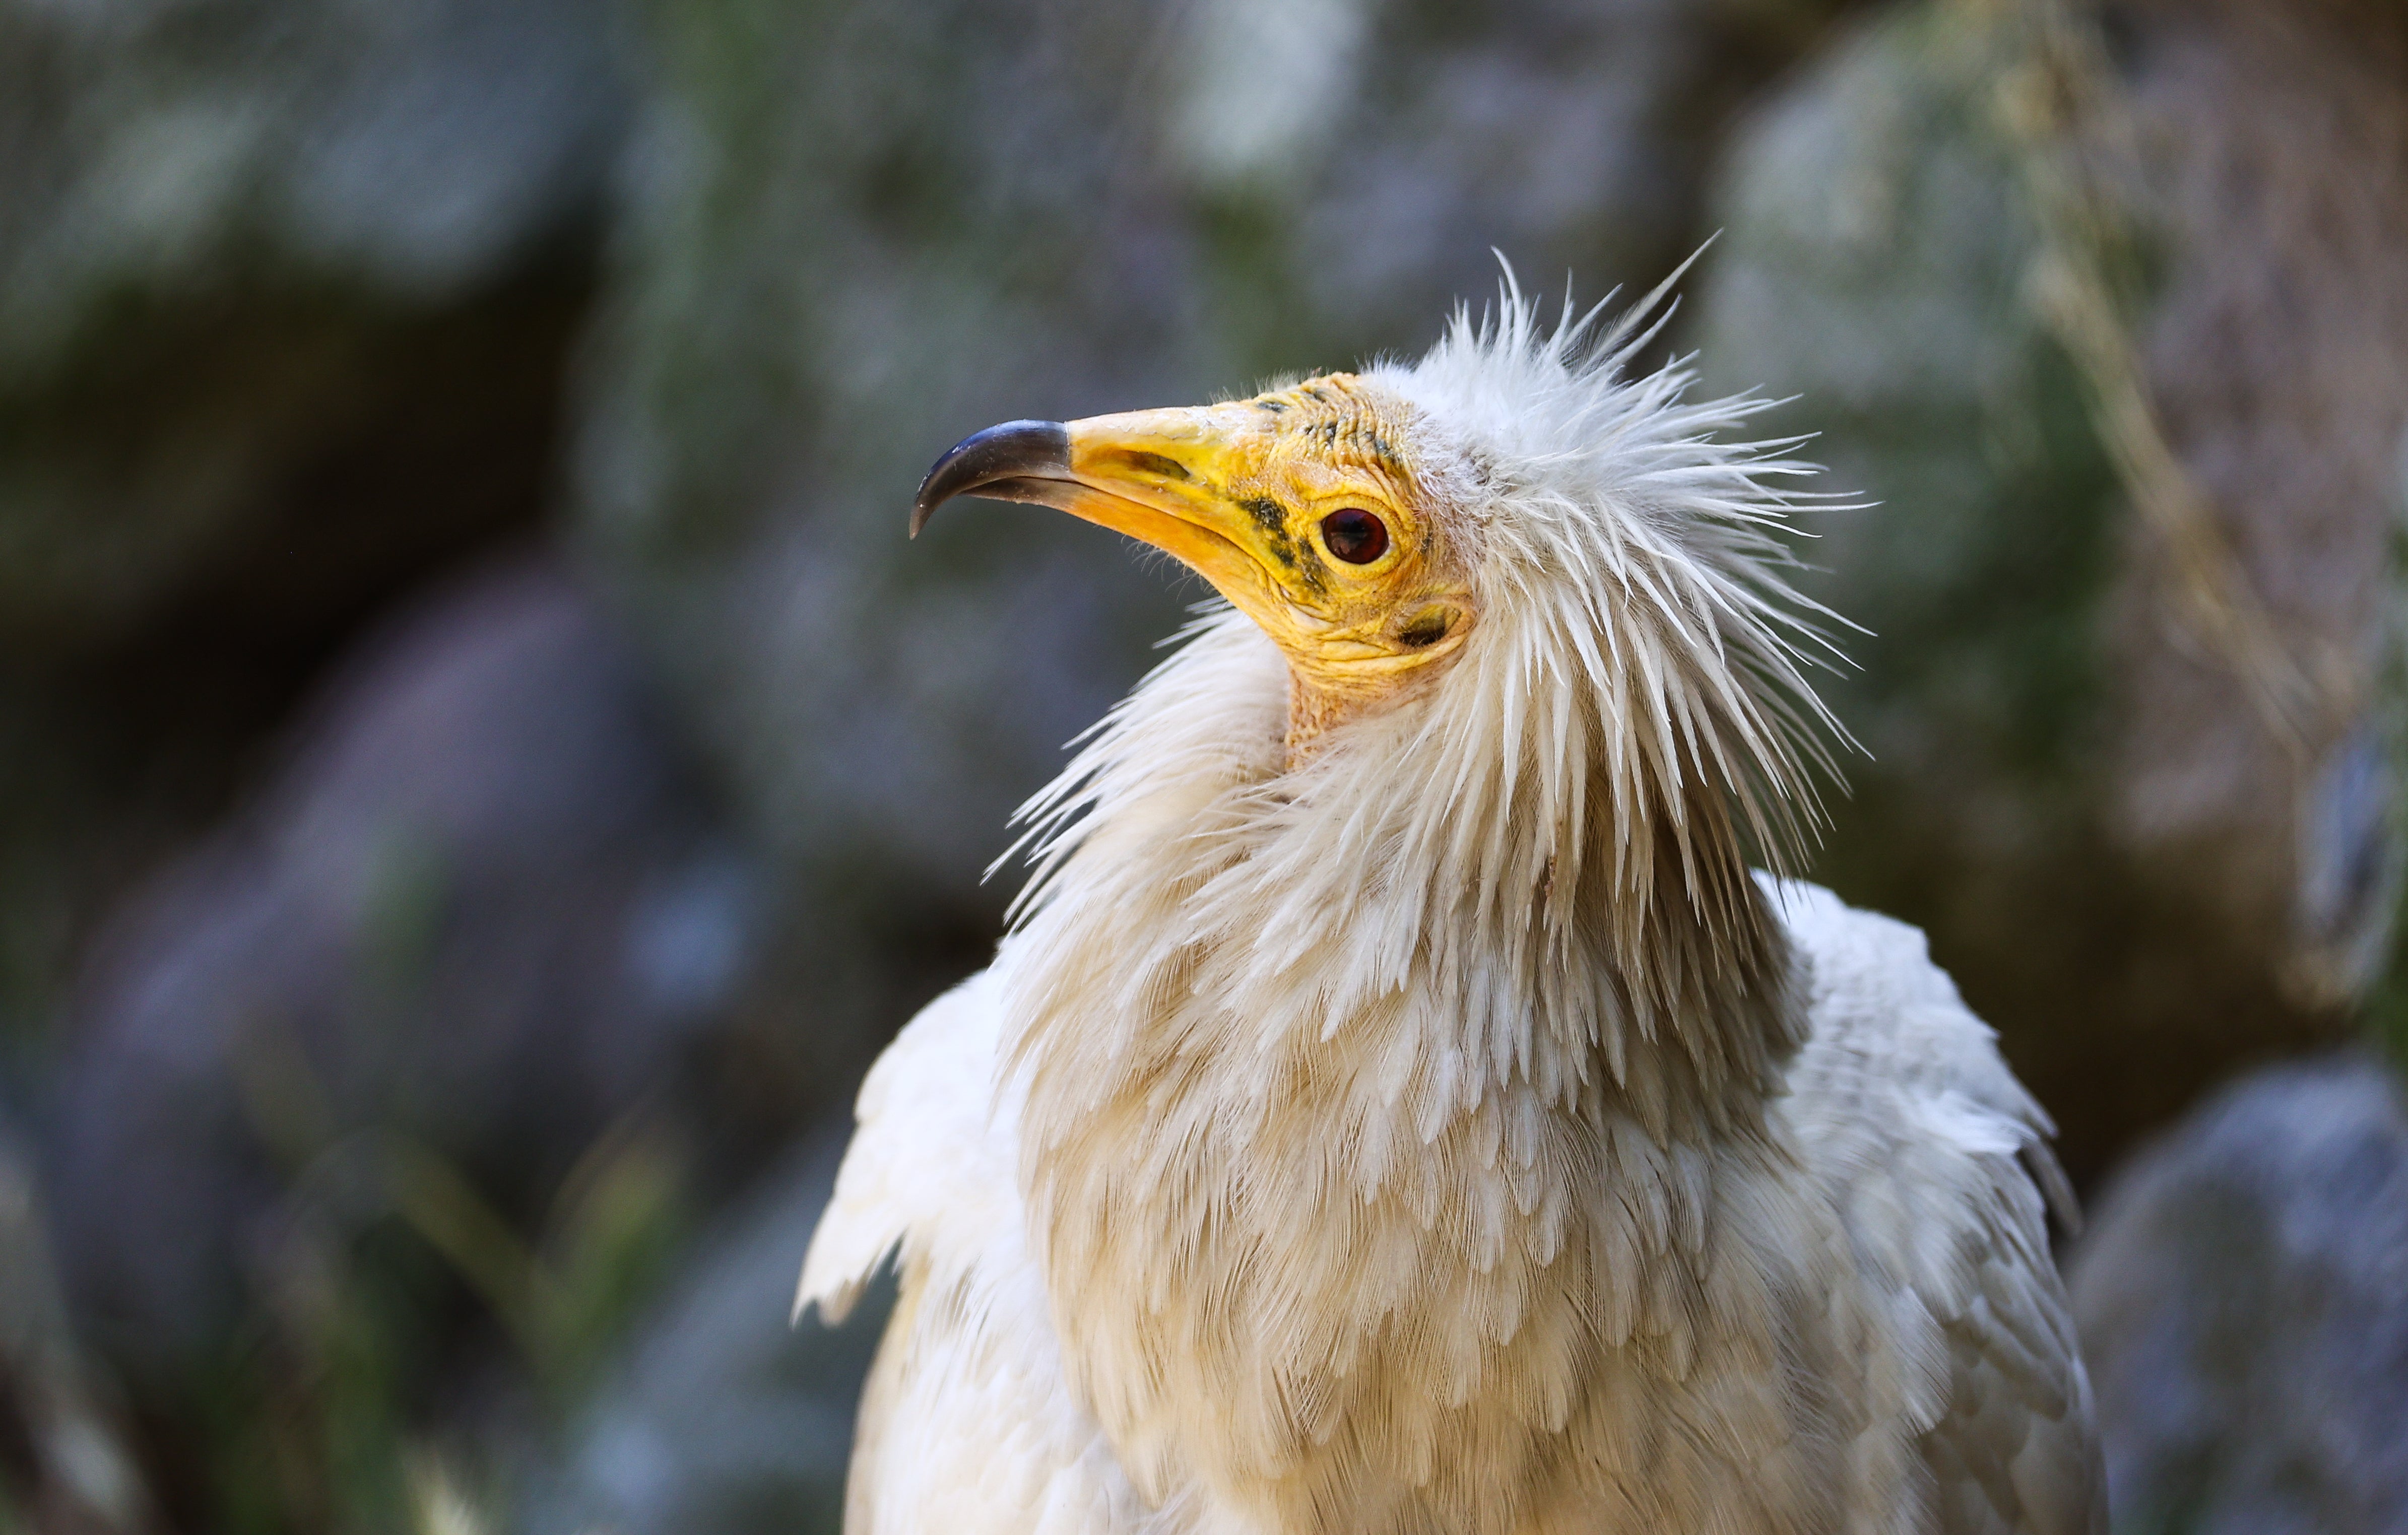 The first Egyptian vulture known to have visited Britain in 153 years was seen on the Isles of Scilly